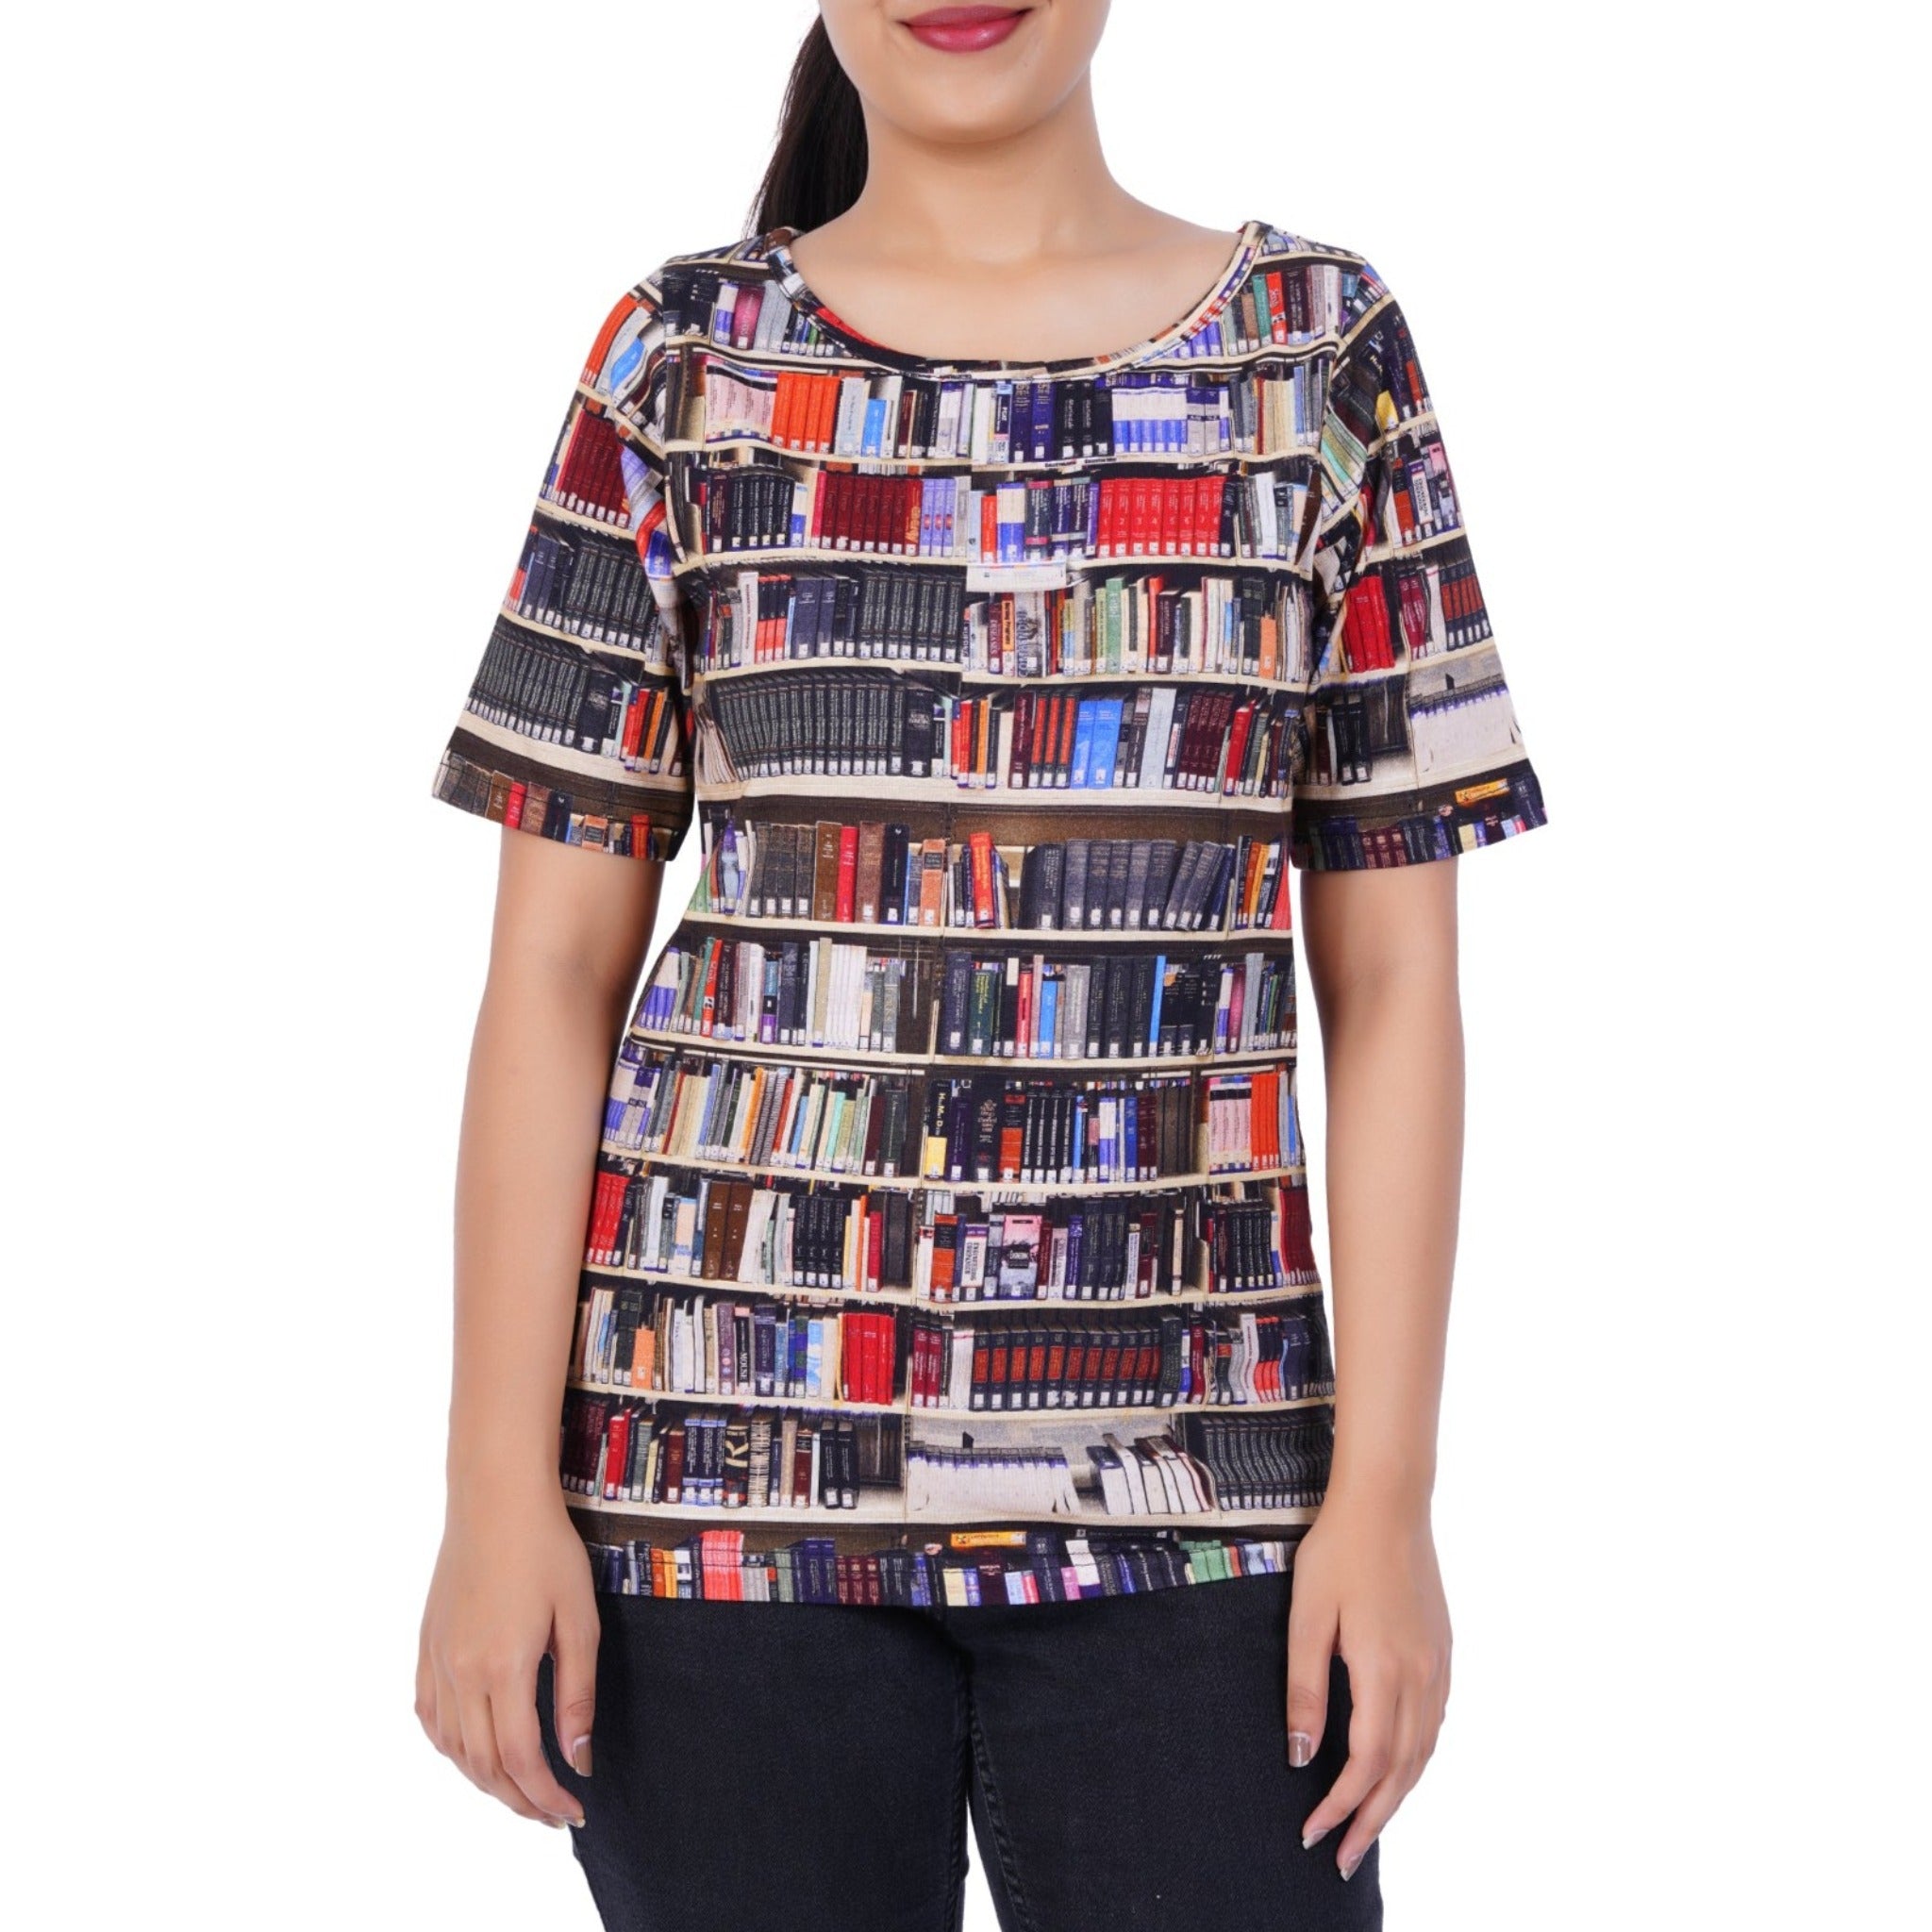 Library Shelves Tunic Top